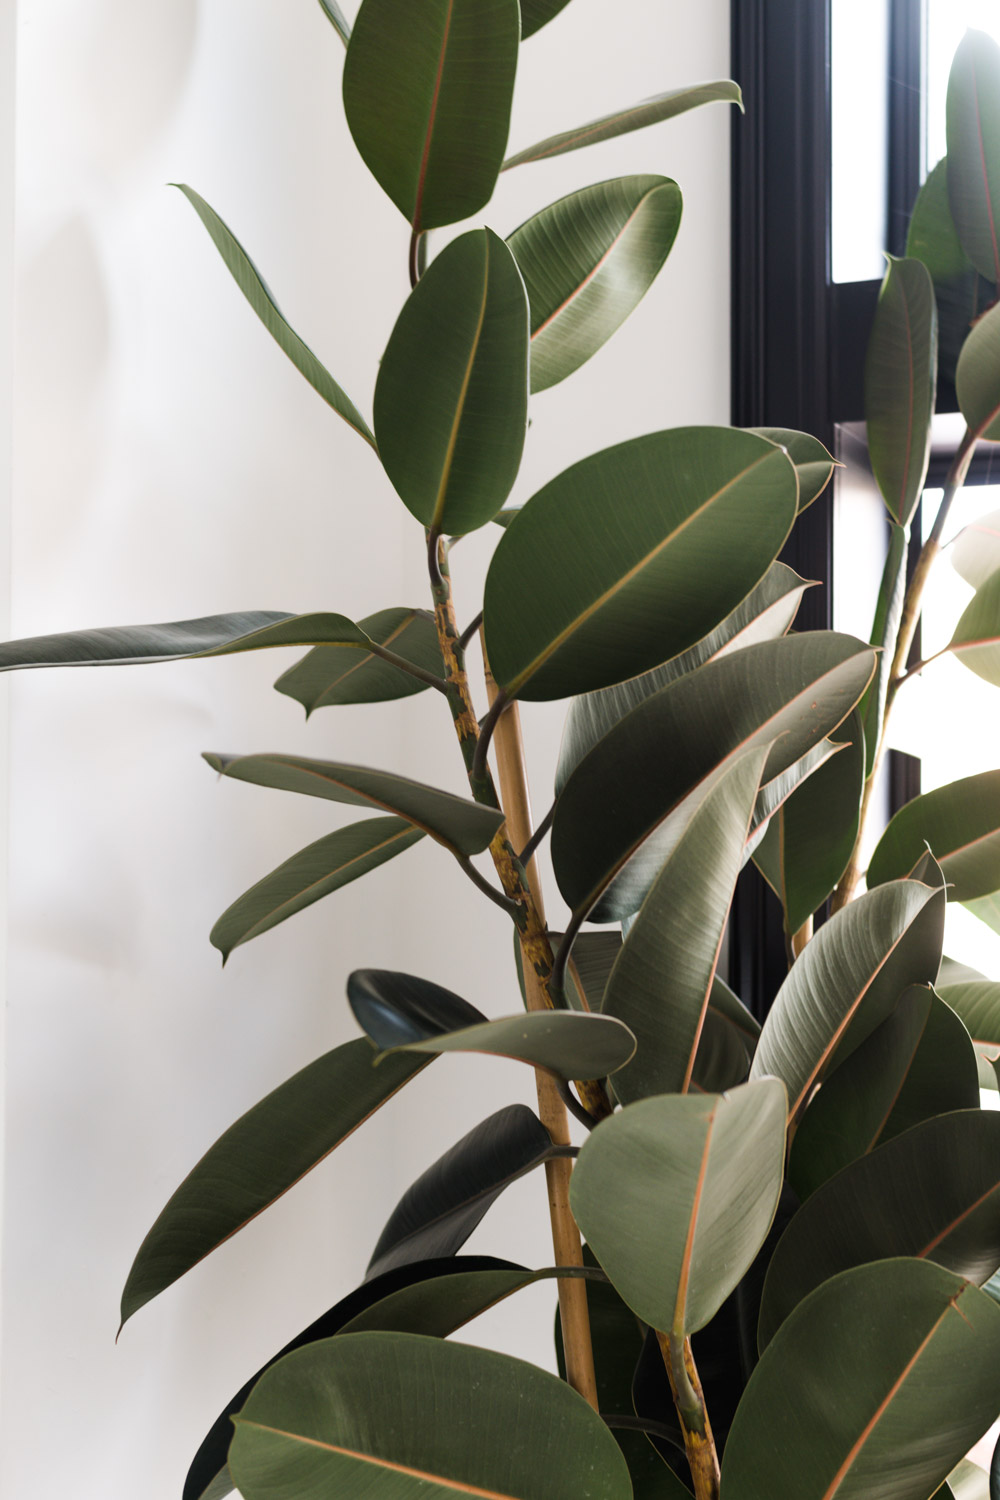 A Complete Guide To Caring For Rubber Plants and Answers to Why